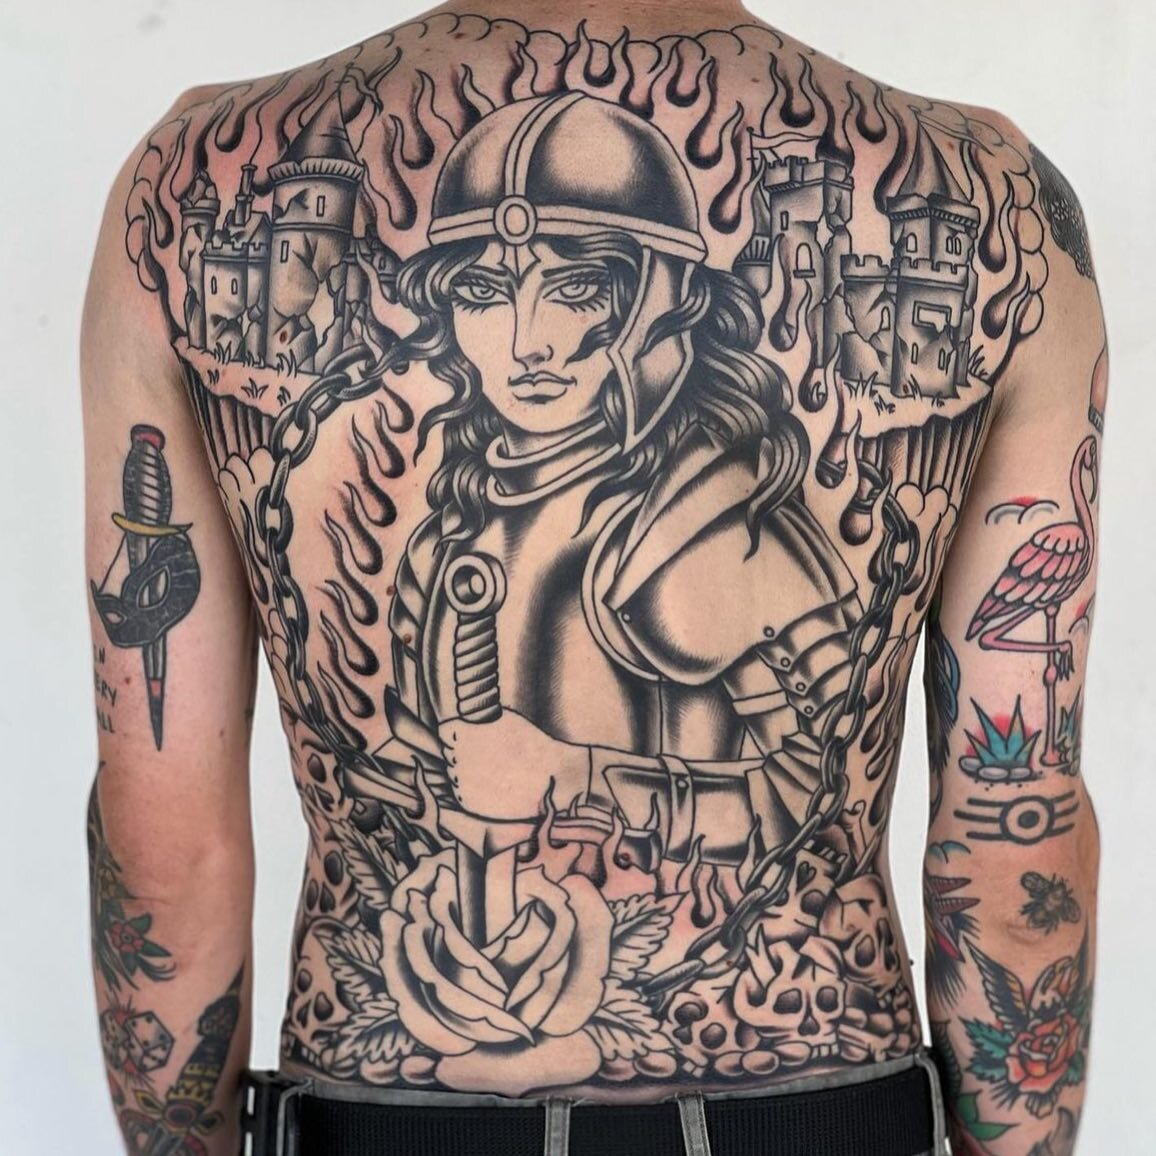 Back piece by @ridgeyoung